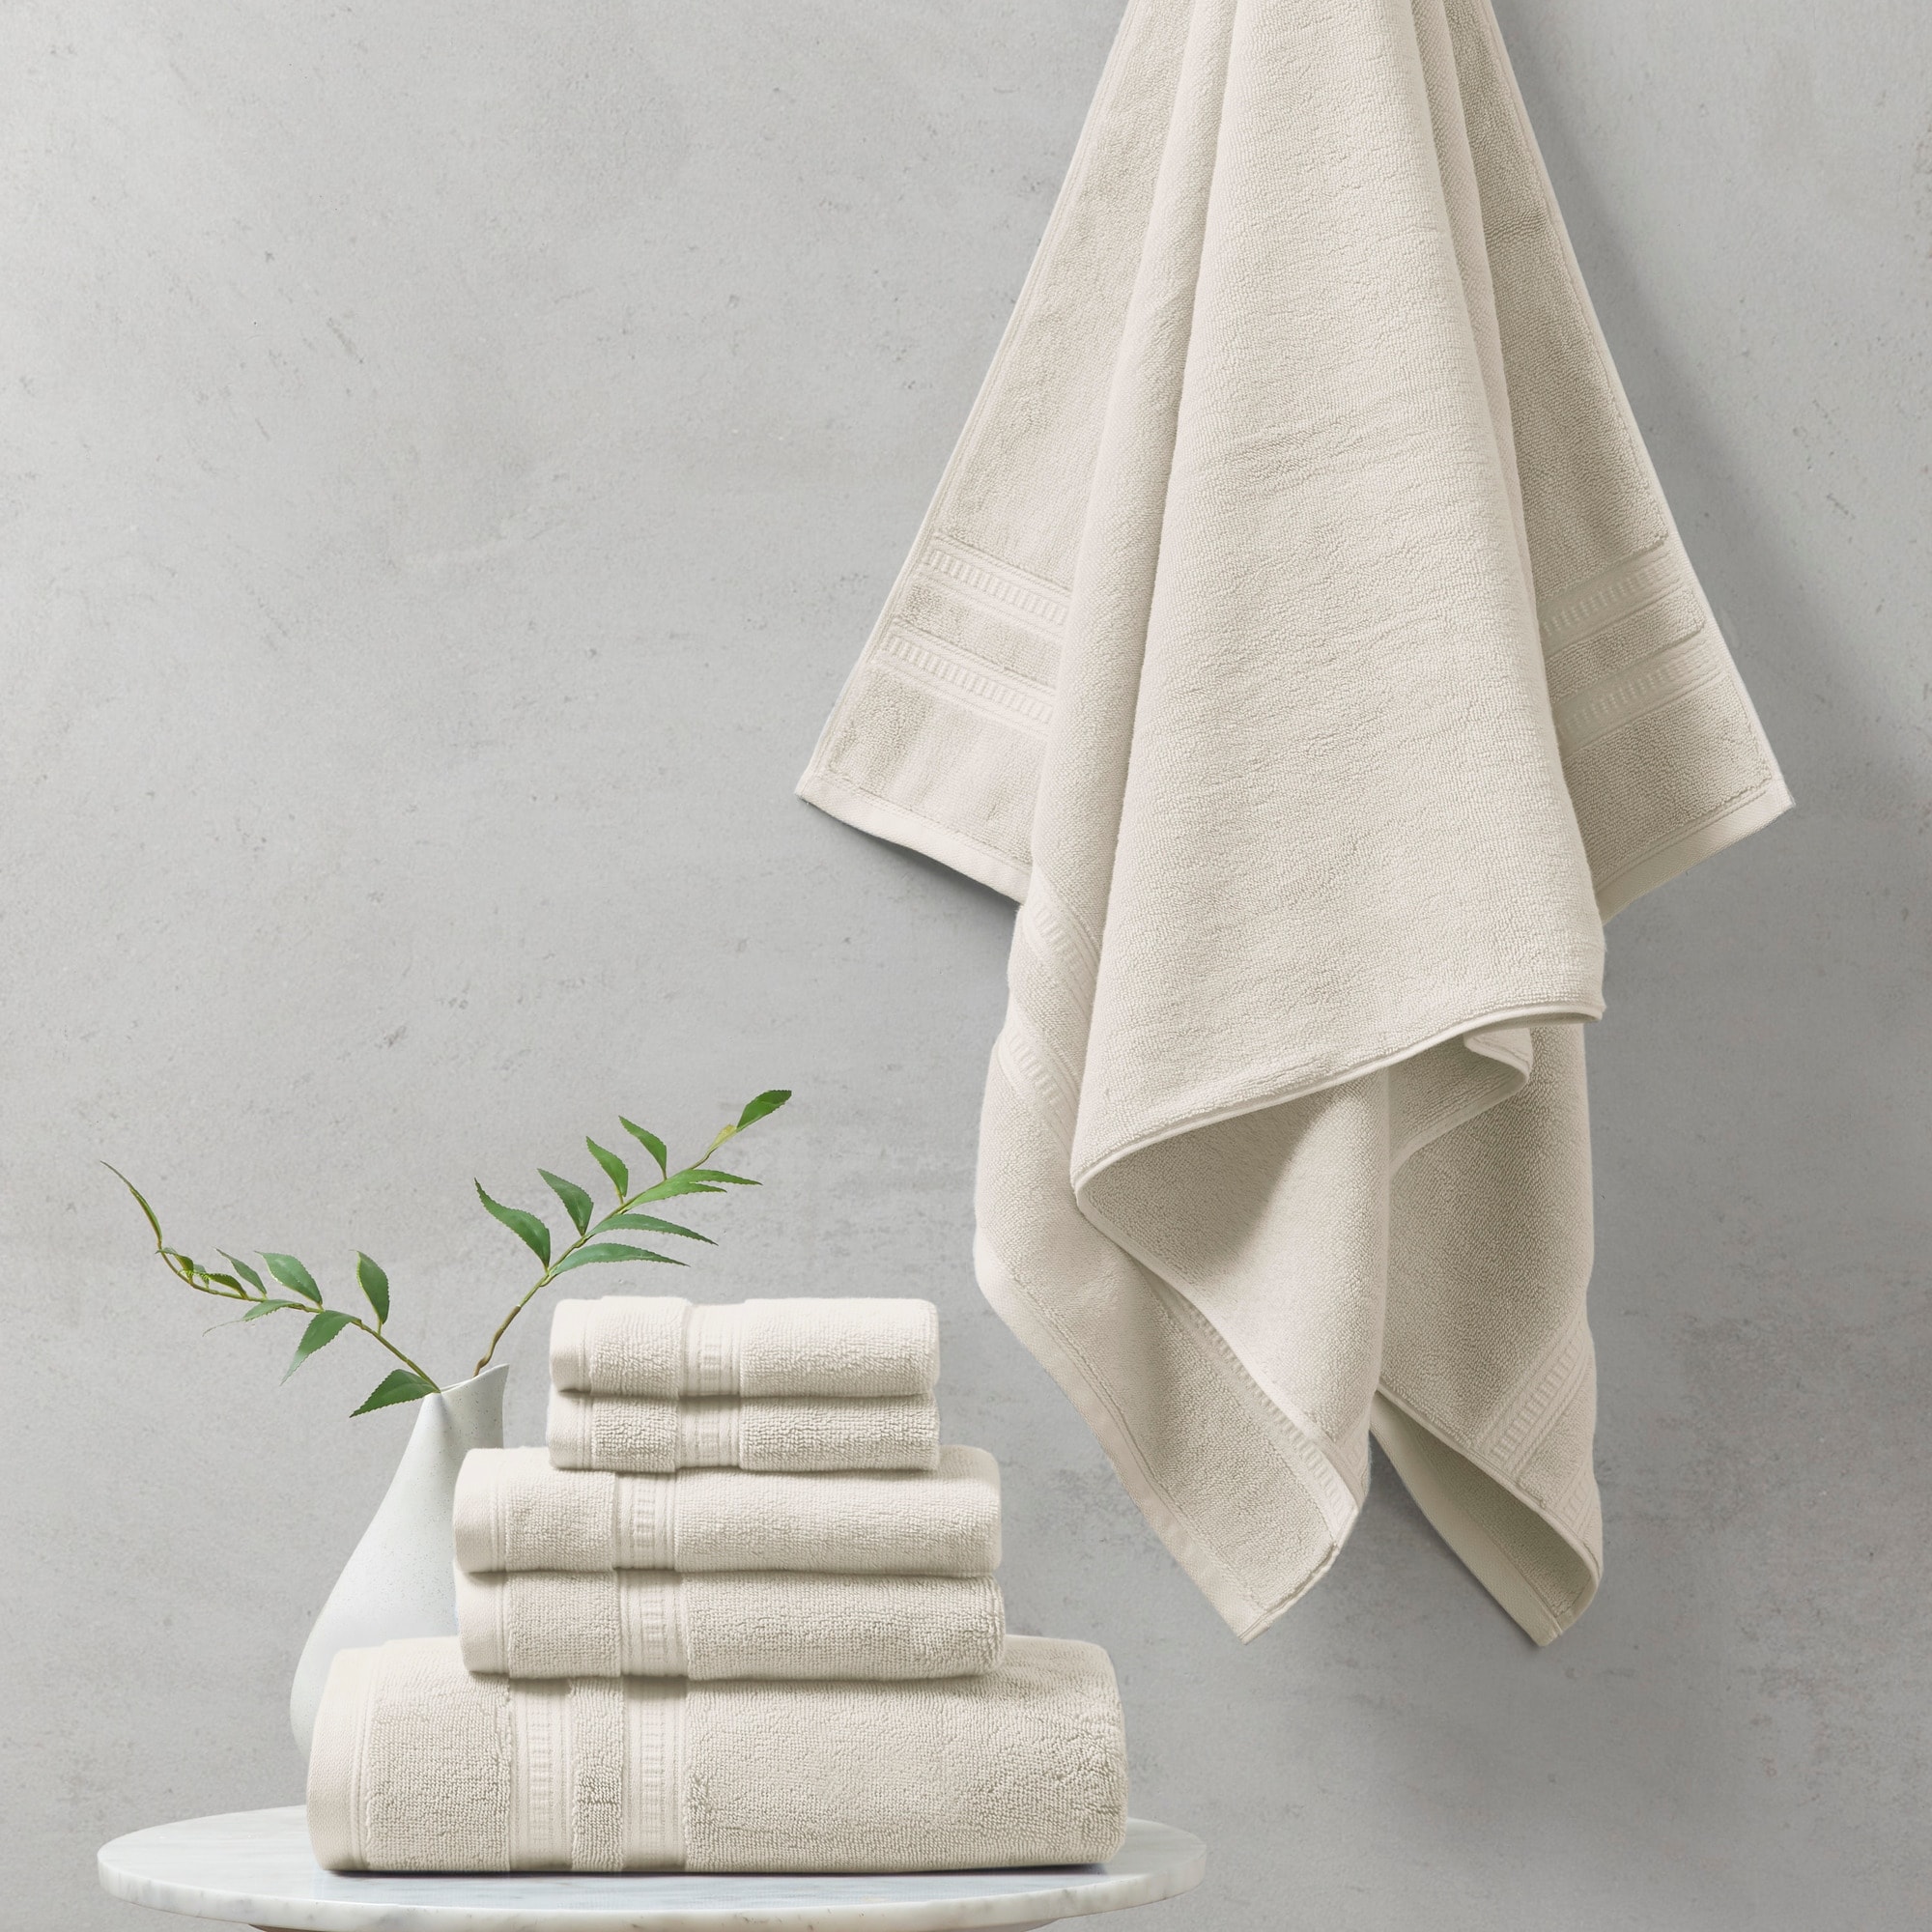 Feather & Stitch 6 Piece Sets of Bathroom Towels - 100% Cotton